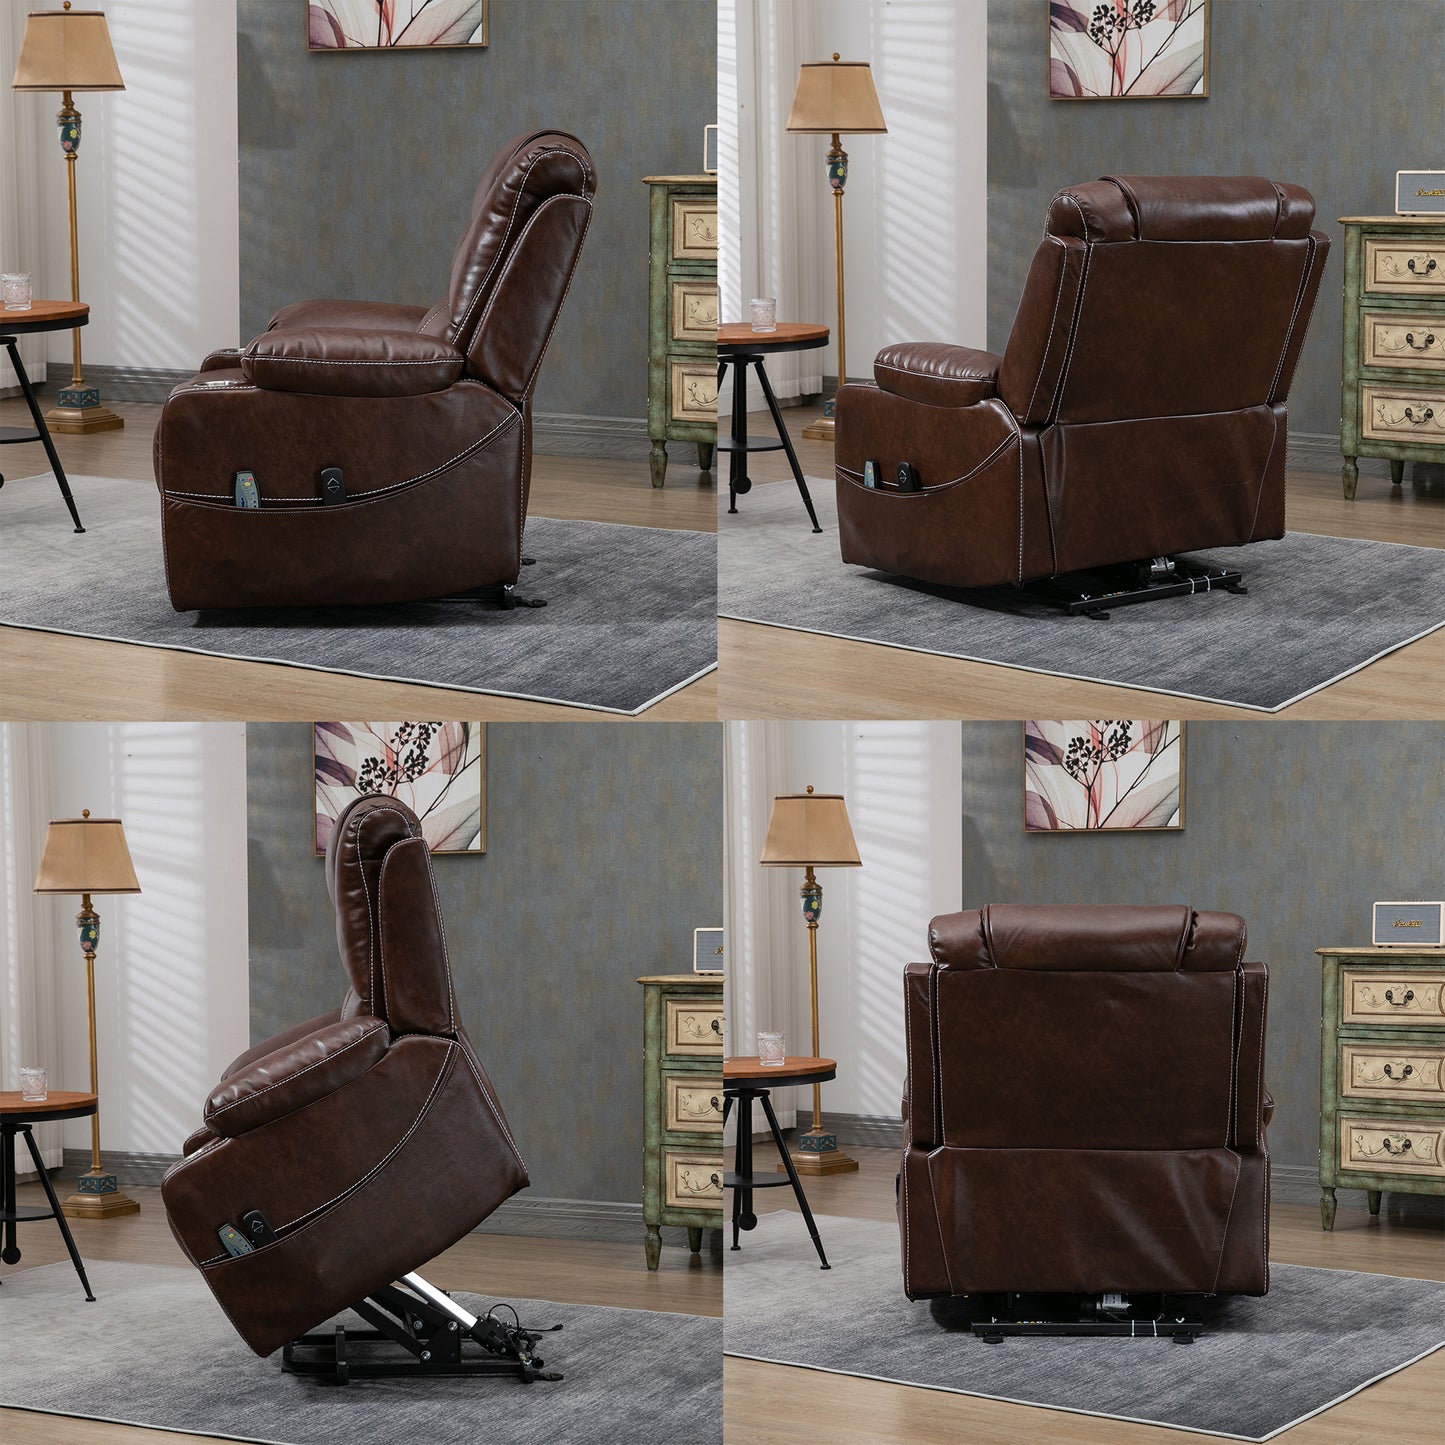 Large Power Lift Recliner Chair for Living Room, Oversized Leather Electric Lounge Chair Single Sofa with Cup Holders, USB Port and Side Pockets, Recliner for Elderly Adults Big Man, Brown